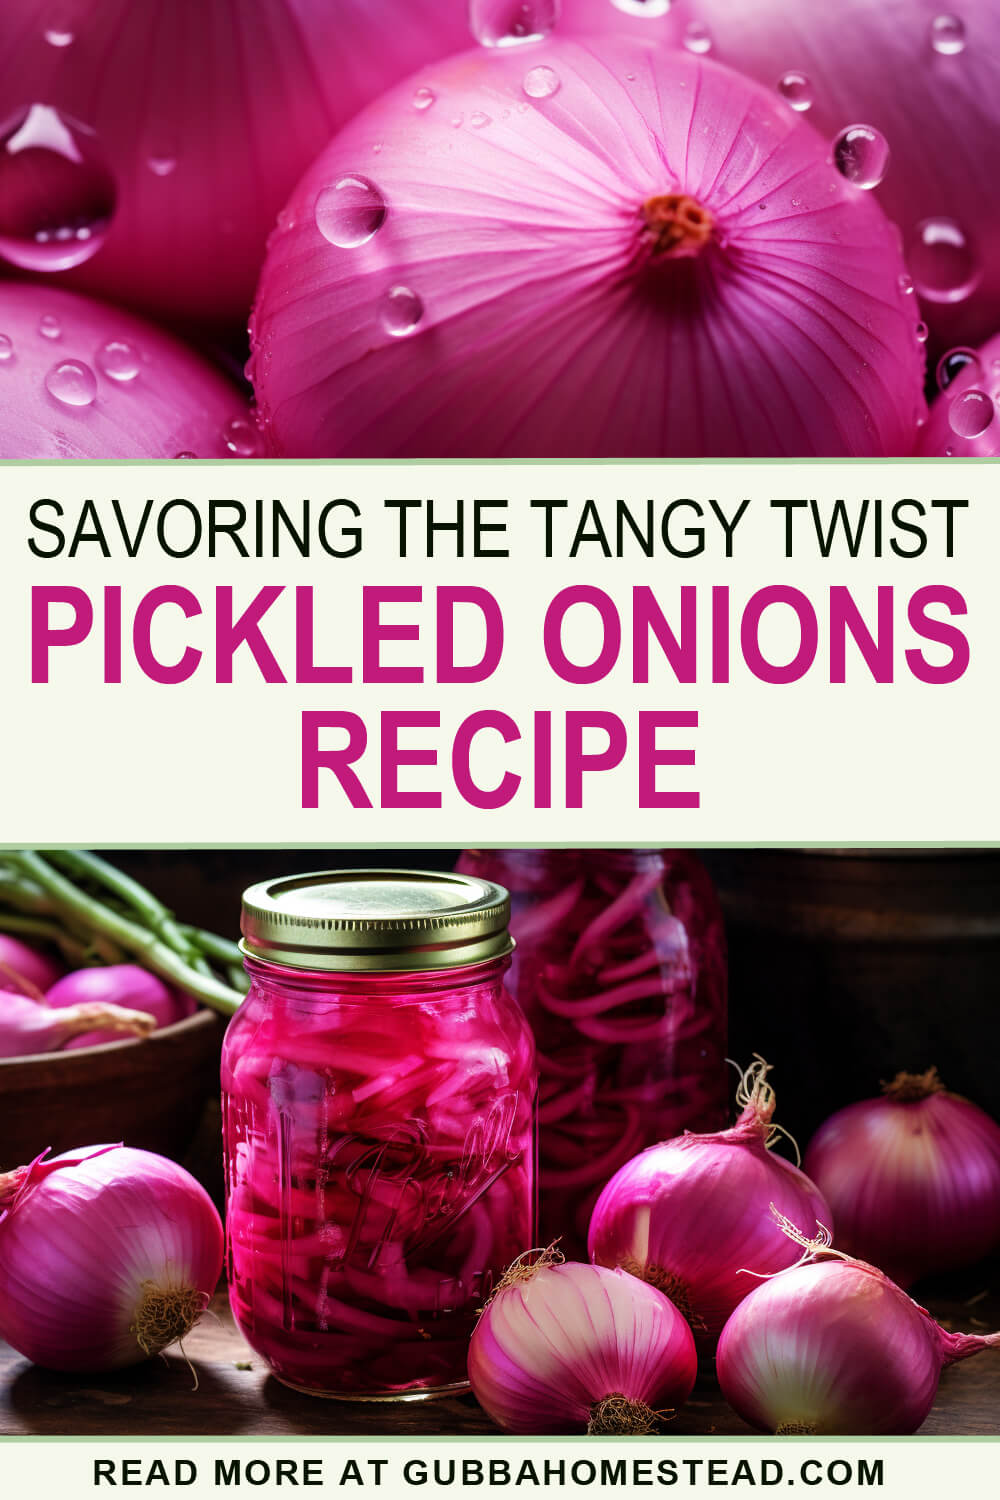 Savoring The Tangy Twist Pickled Onions Recipe